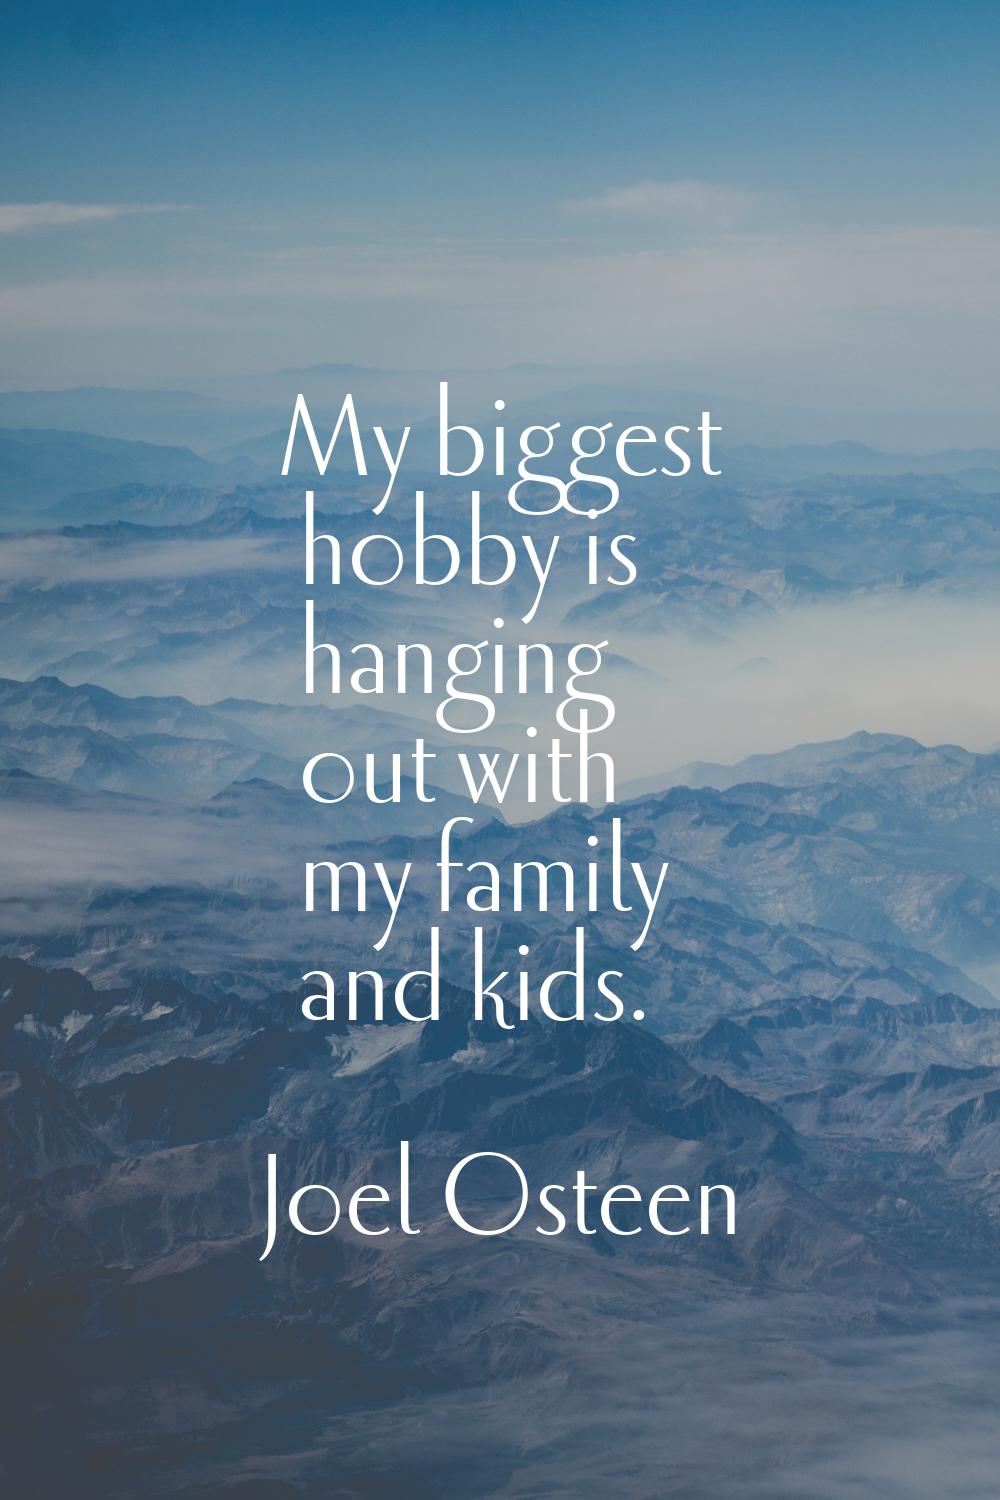 My biggest hobby is hanging out with my family and kids.